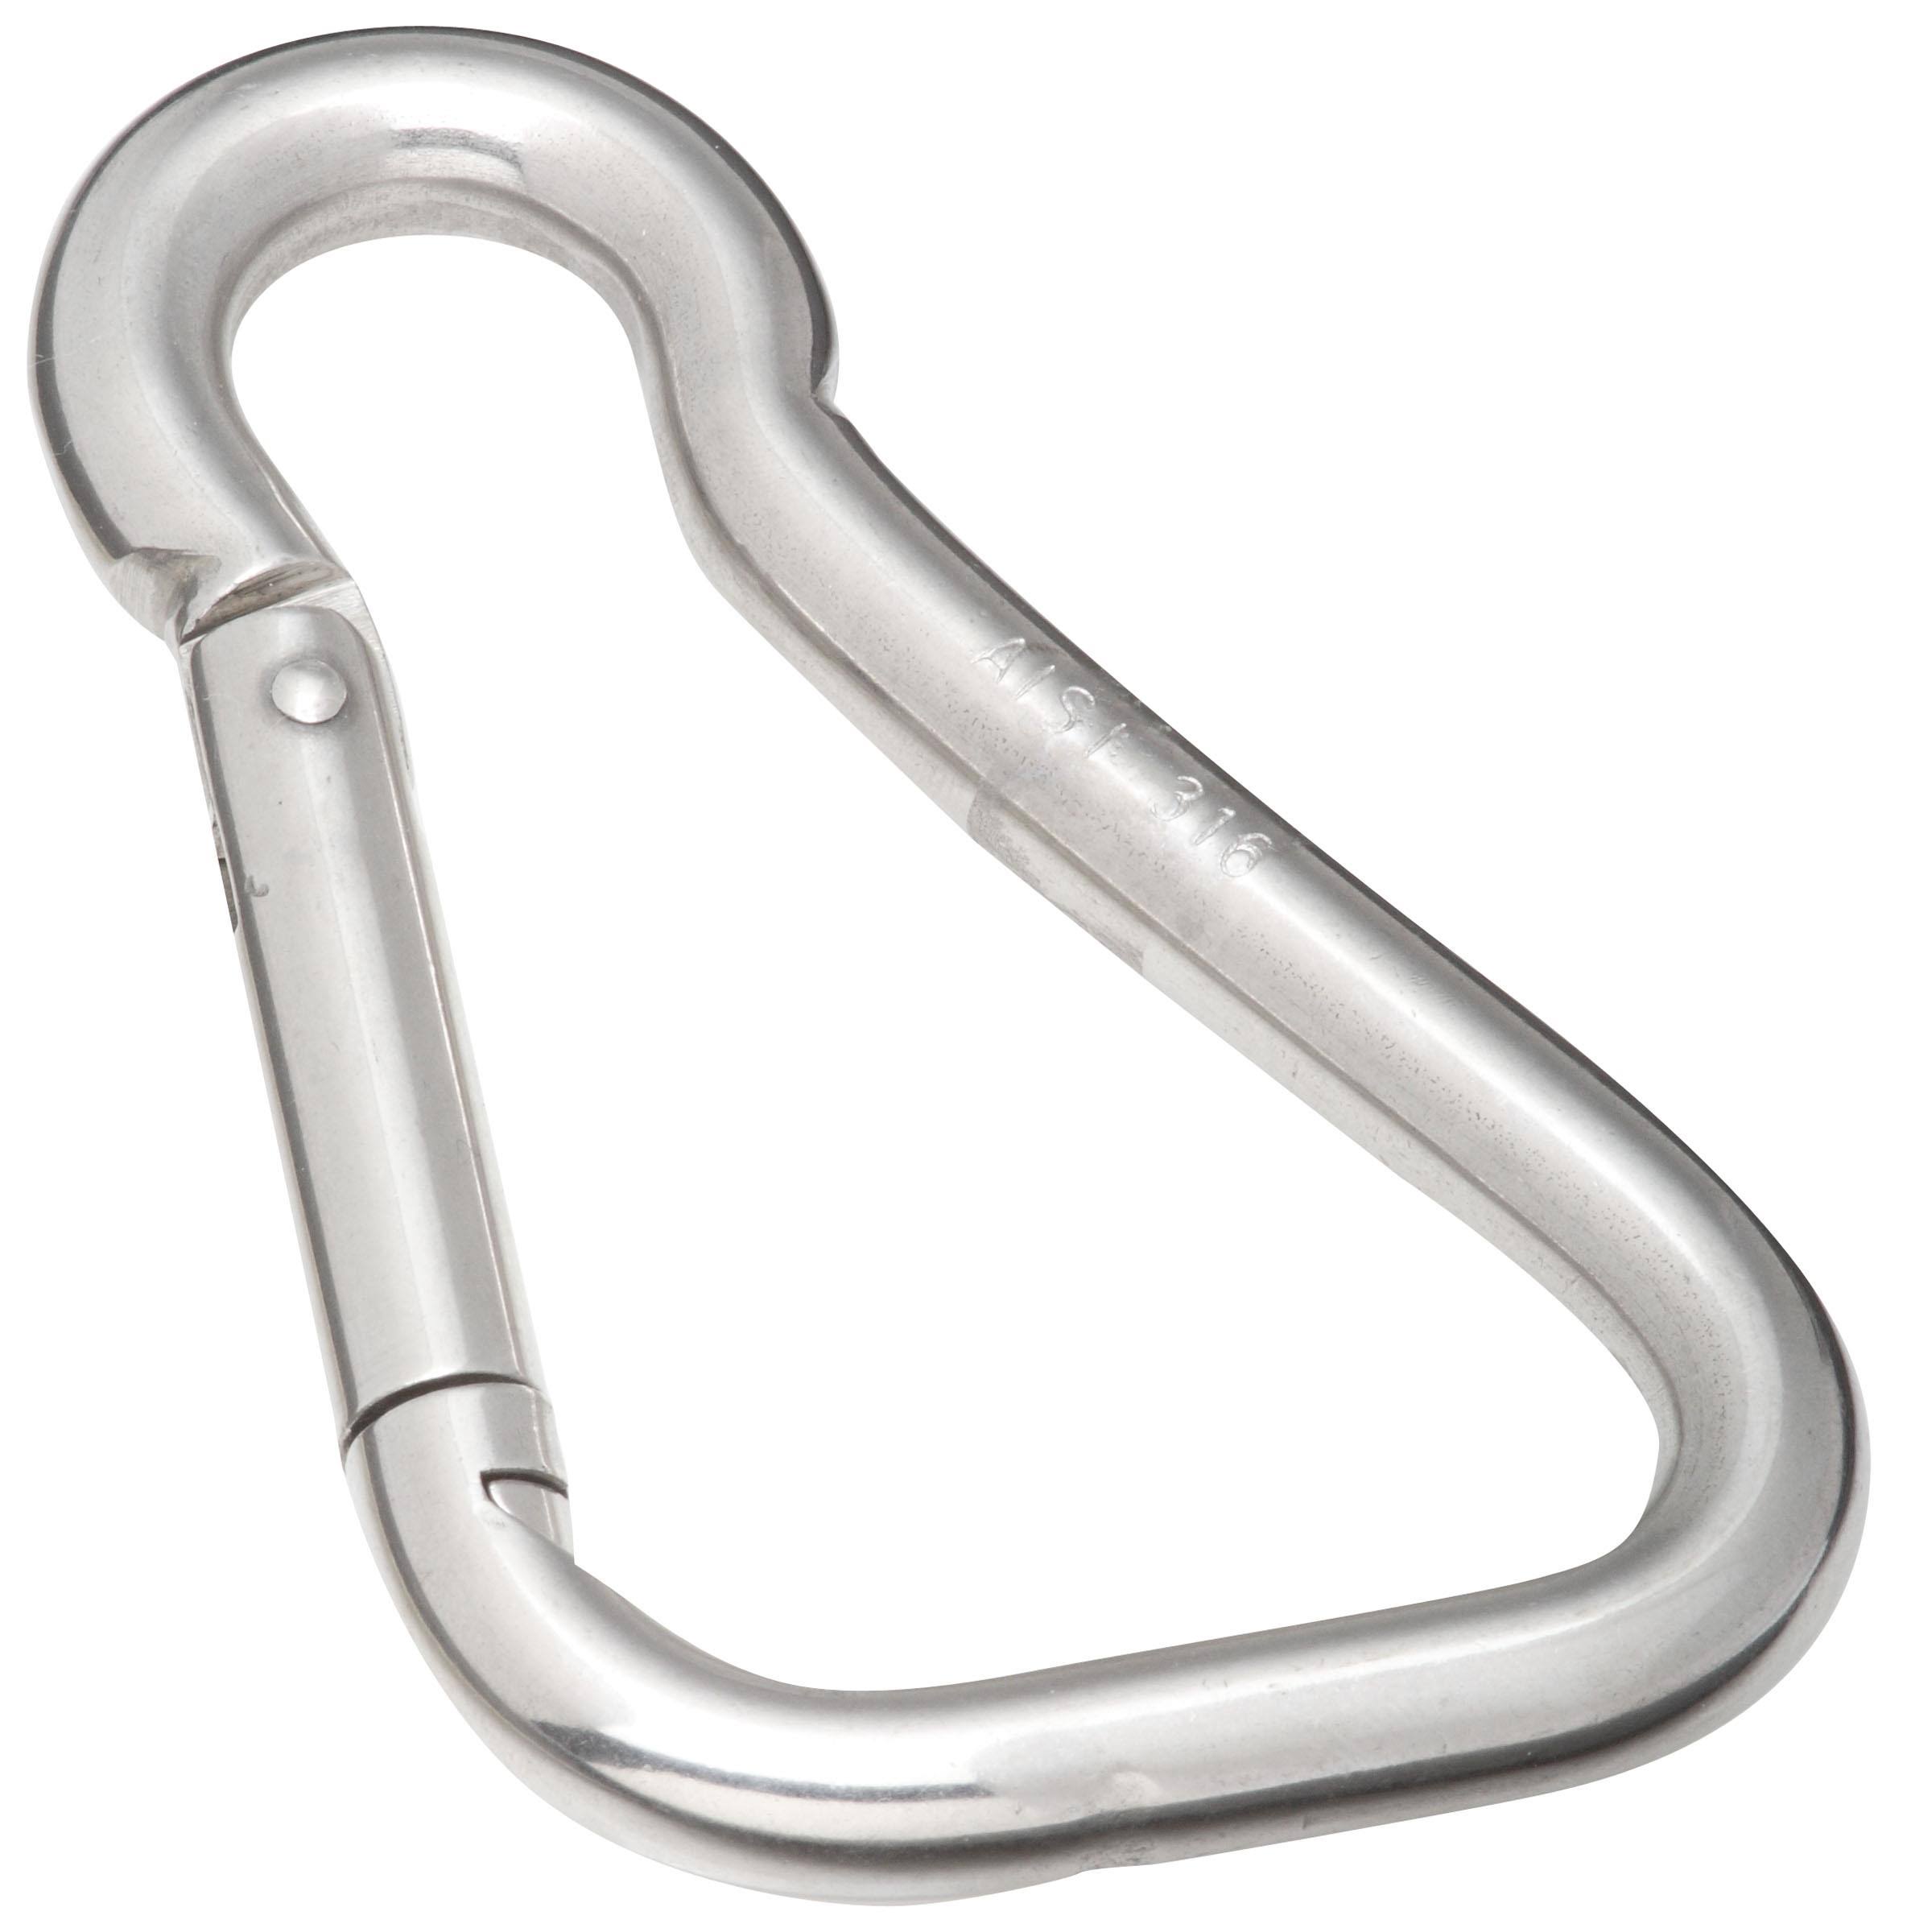 Stanley Hardware Spring Snap - Stainless Steel, 3/4" x 4 3/4"